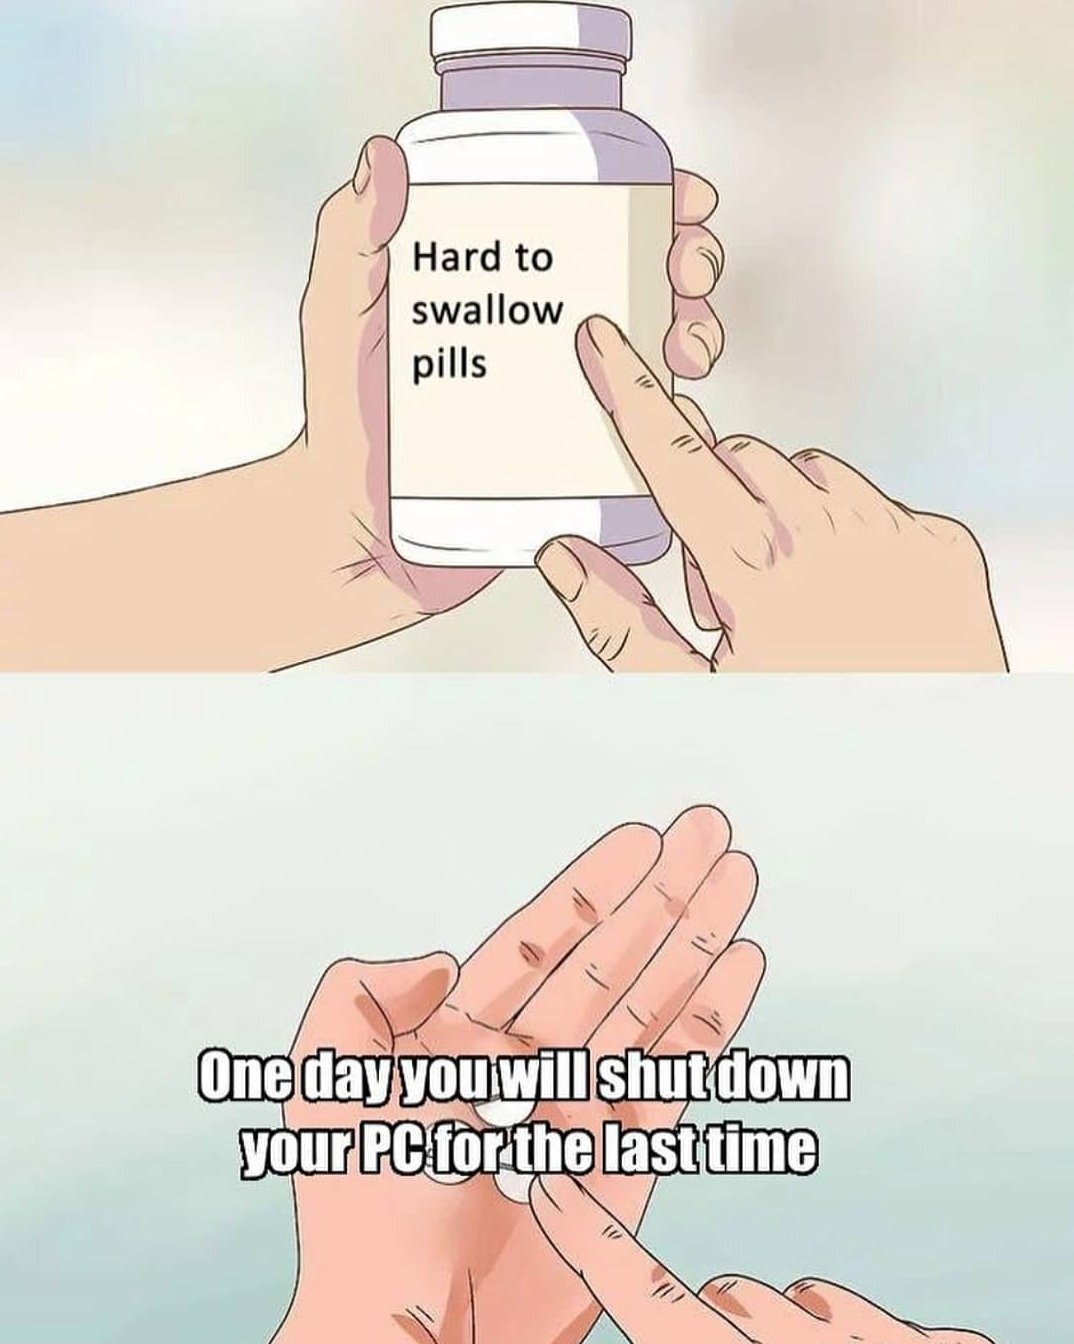 funny gaming memes - hard to swallow pill memes - Hard to swallow pills One day you will shut down your Pc for the last time